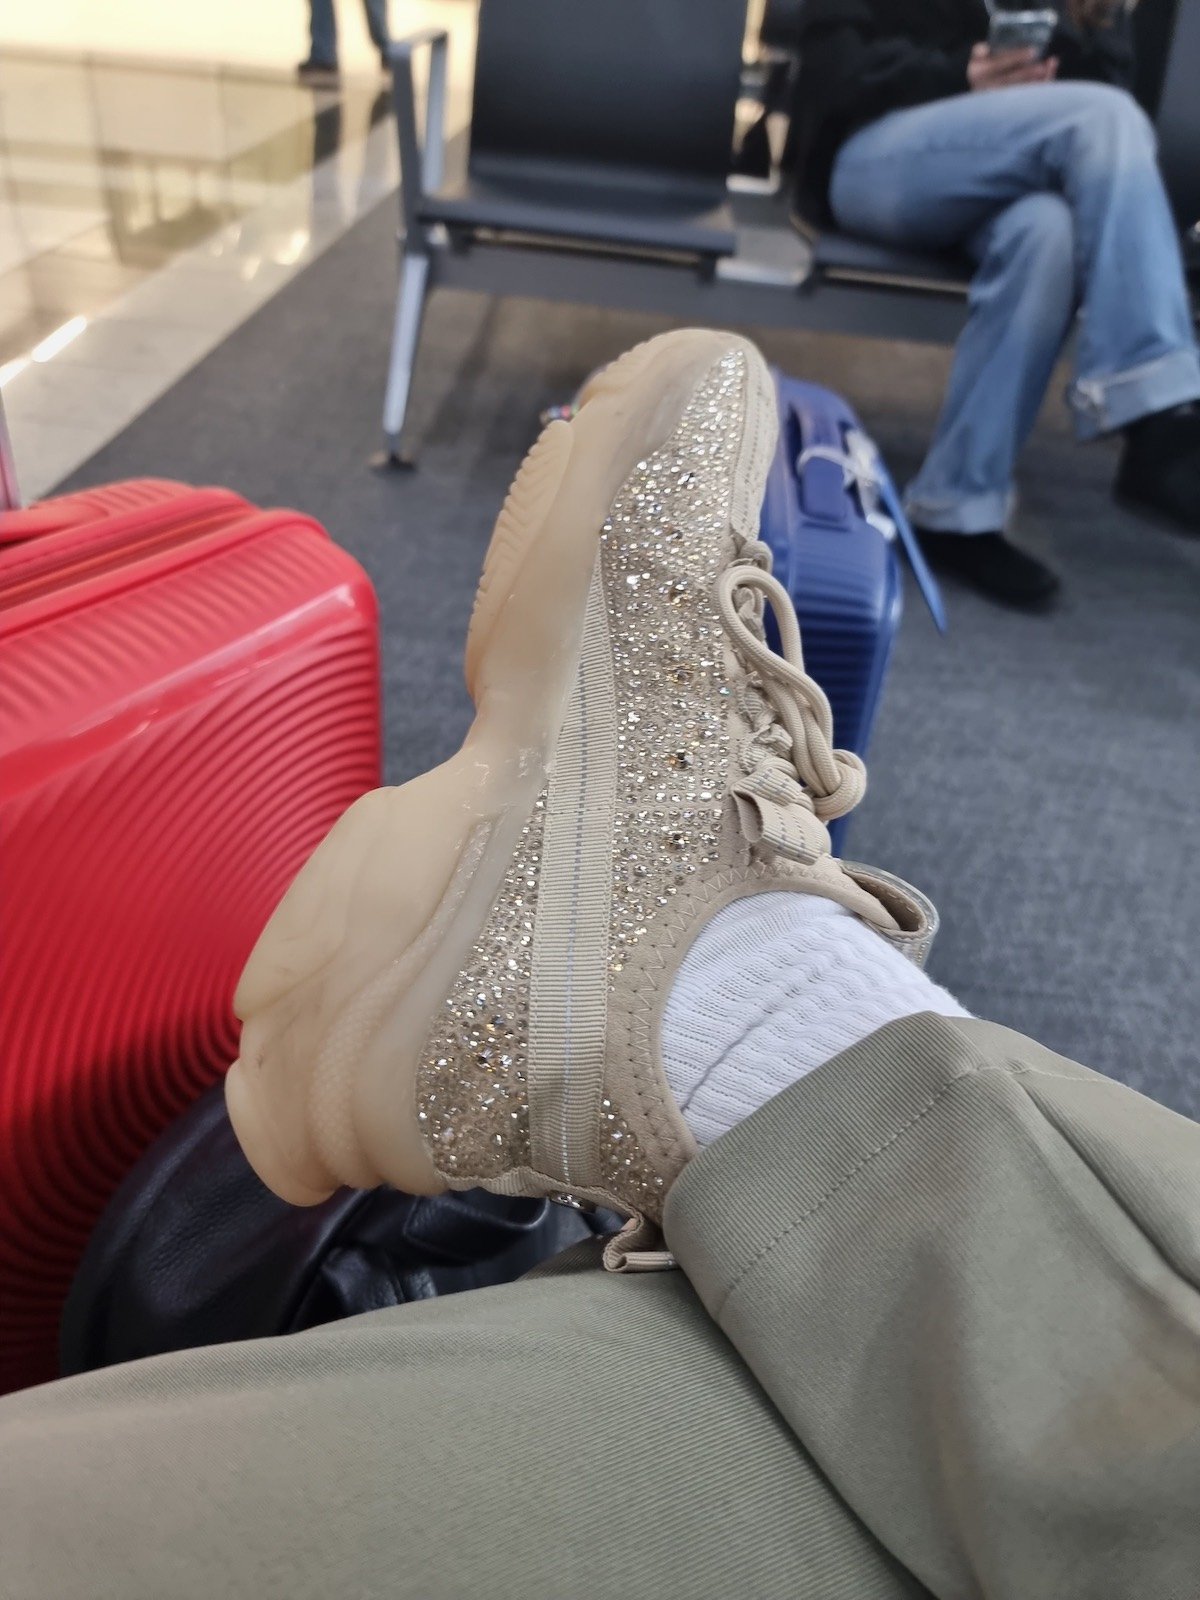 Long Haul Flight Tips + My Go-To Travel Outfit for Red Eyes - wit & whimsy